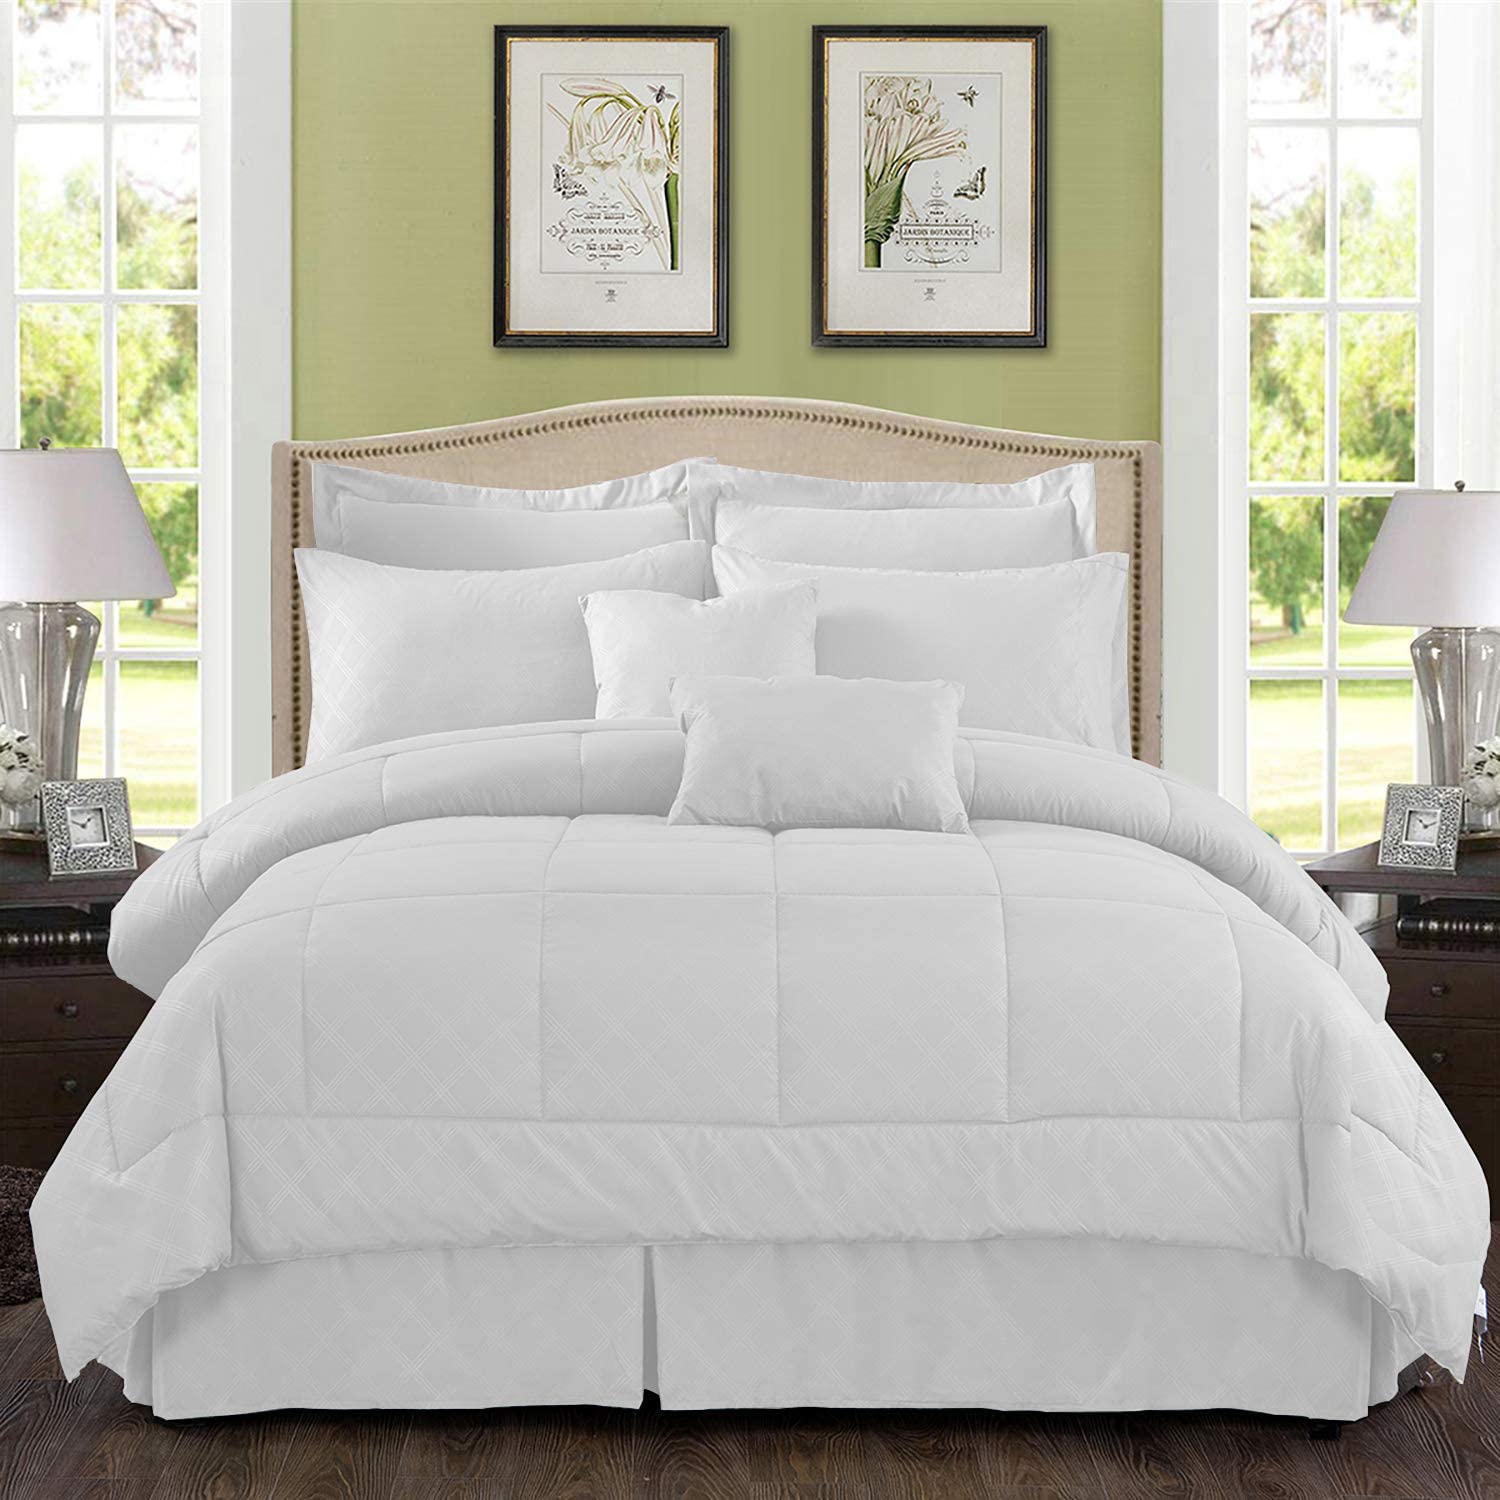 10 Piece Comforter Bedding Set with Sheet Set Fit 14" Details about   MERRY HOME Comforter Set 